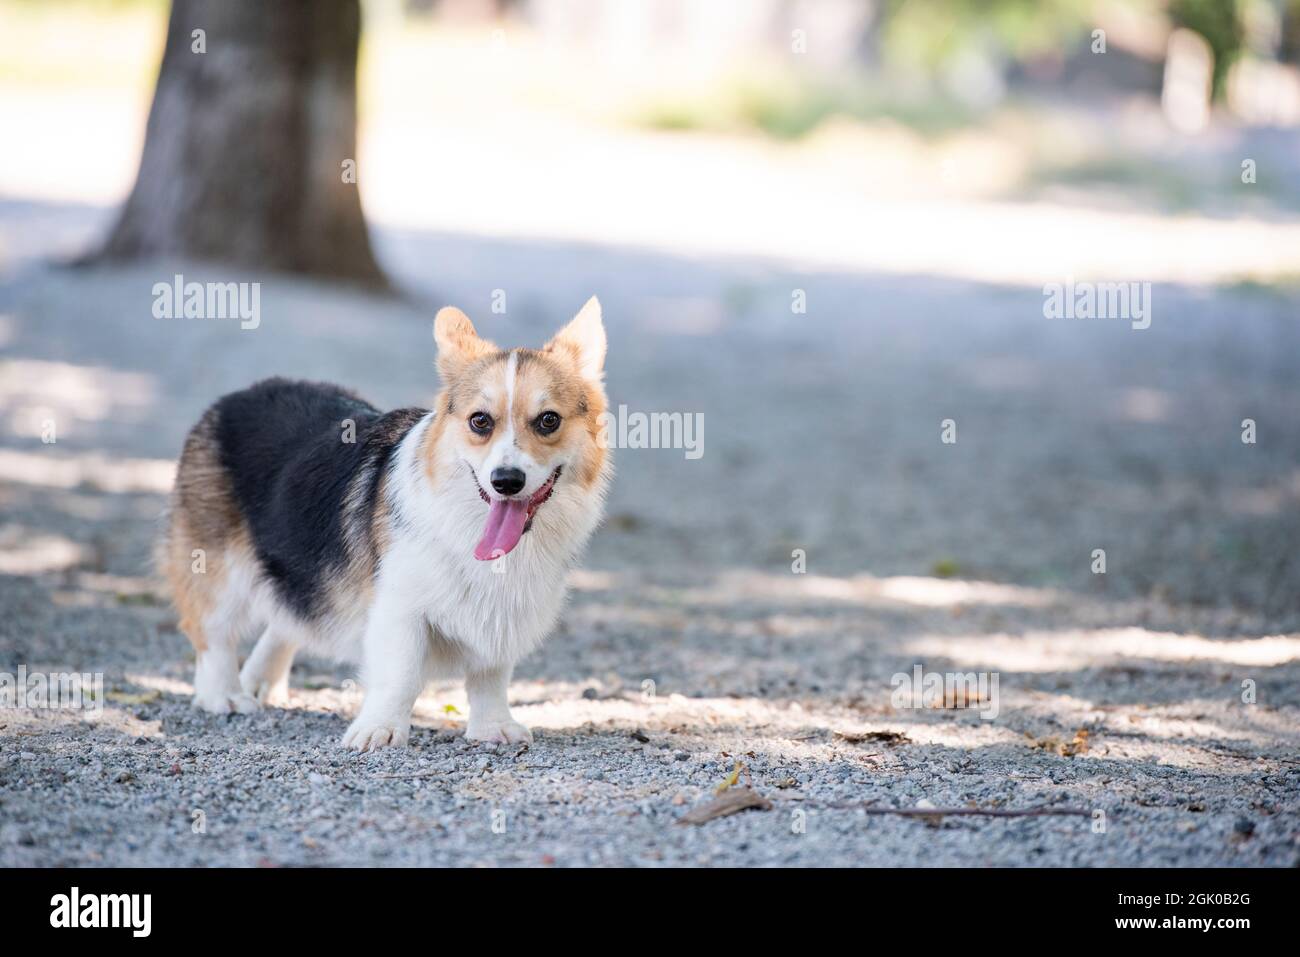 A one-year-old corgi puppy stops to catch his breath from playing at the dog park in Arlington, Virginia. His tongue is out and he appears to be smili Stock Photo